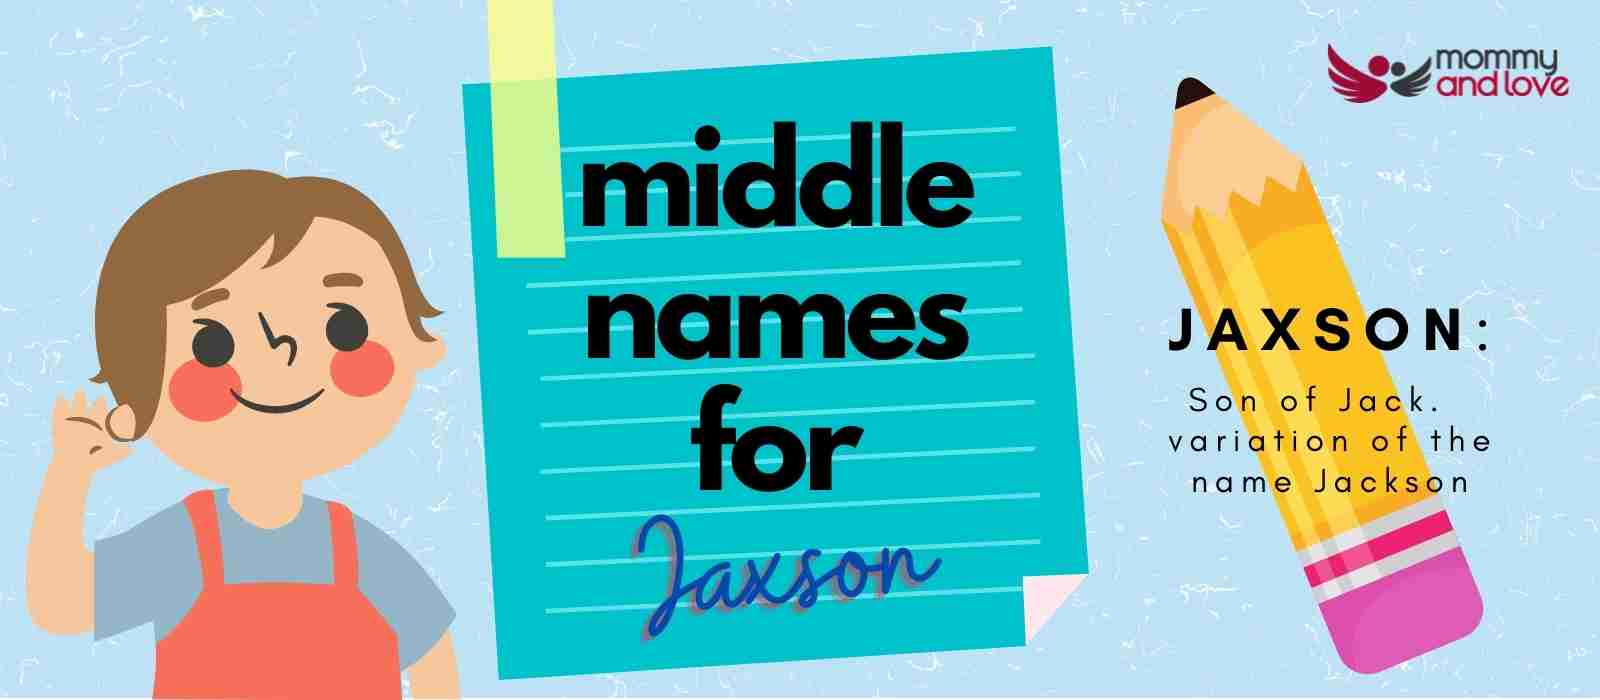 Middle Names for Jaxson